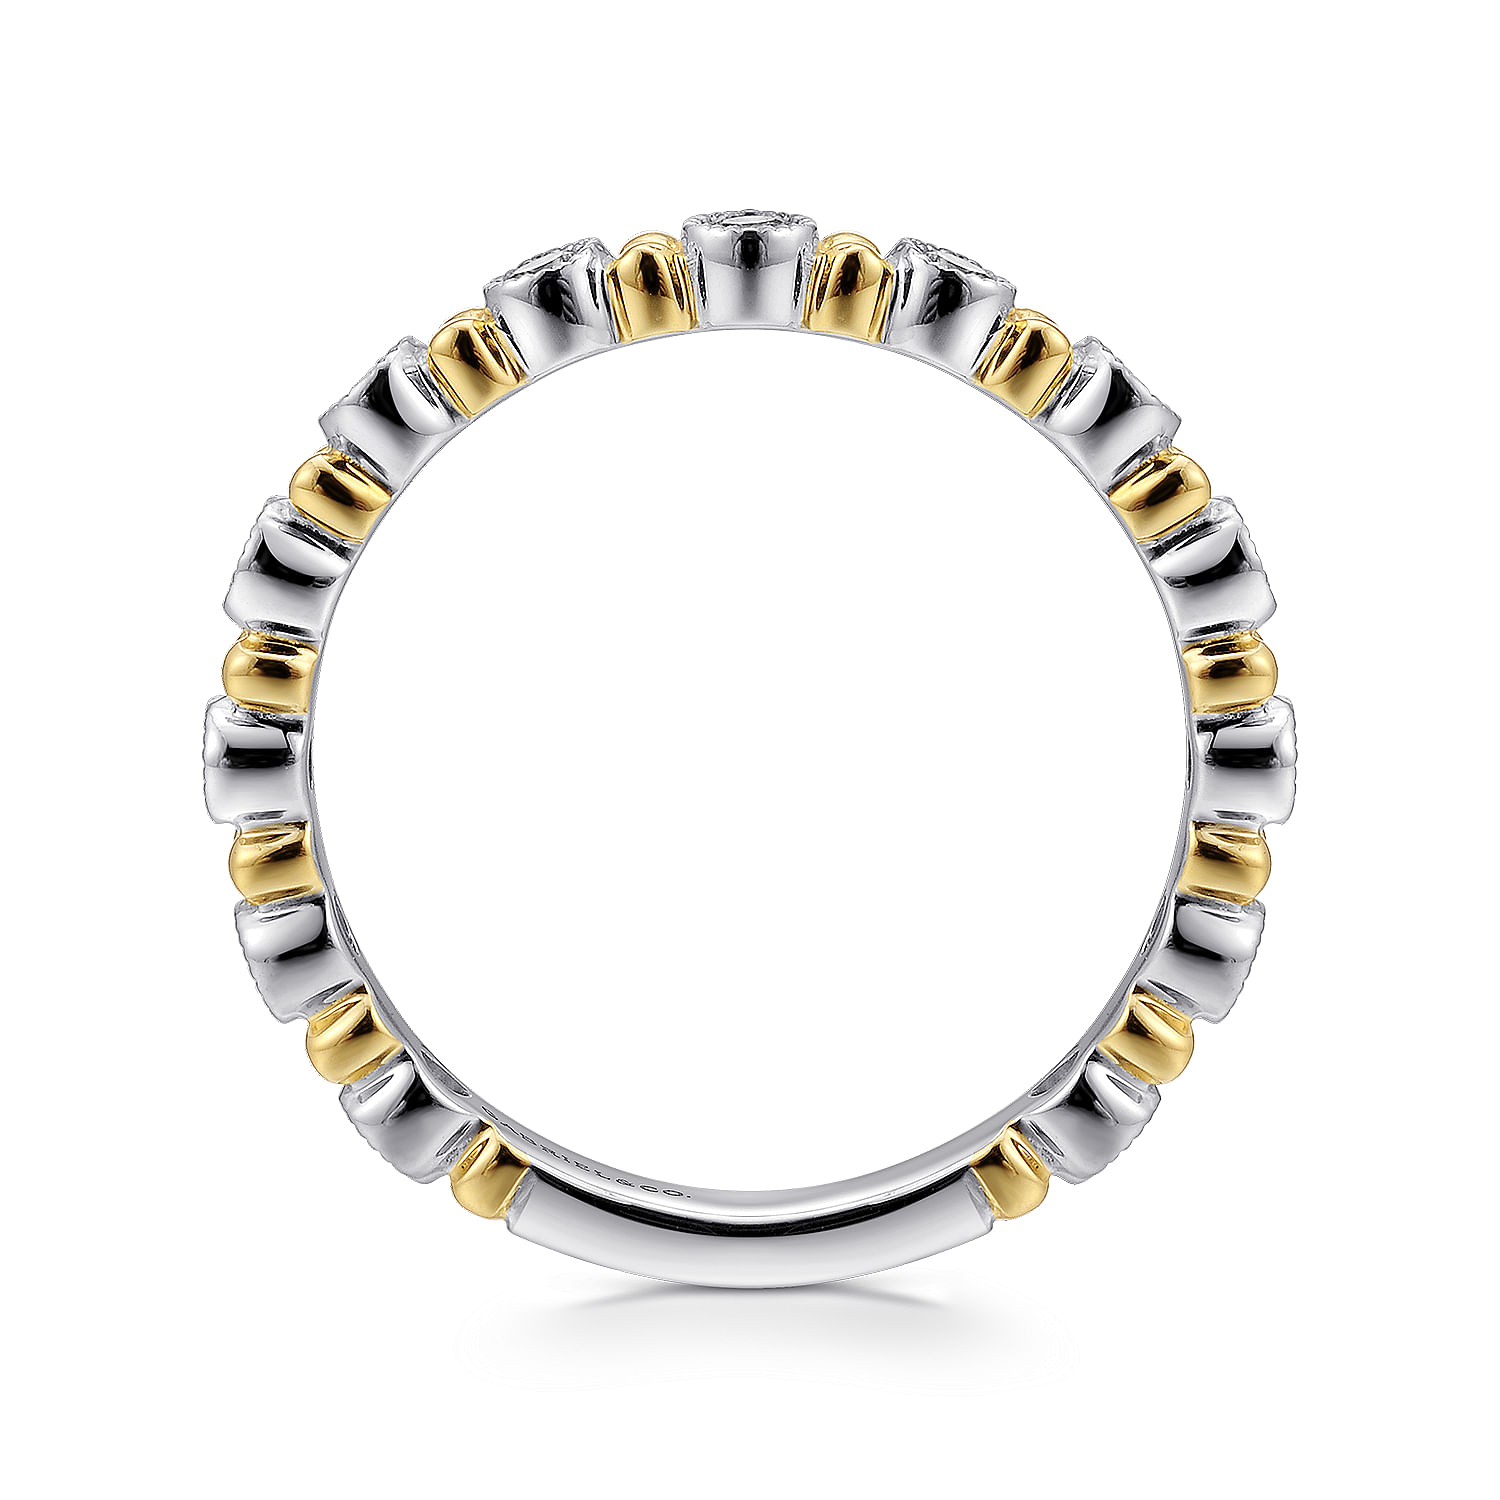 14K White Gold Stackable Diamond Ring with Yellow Gold Bead Spacers